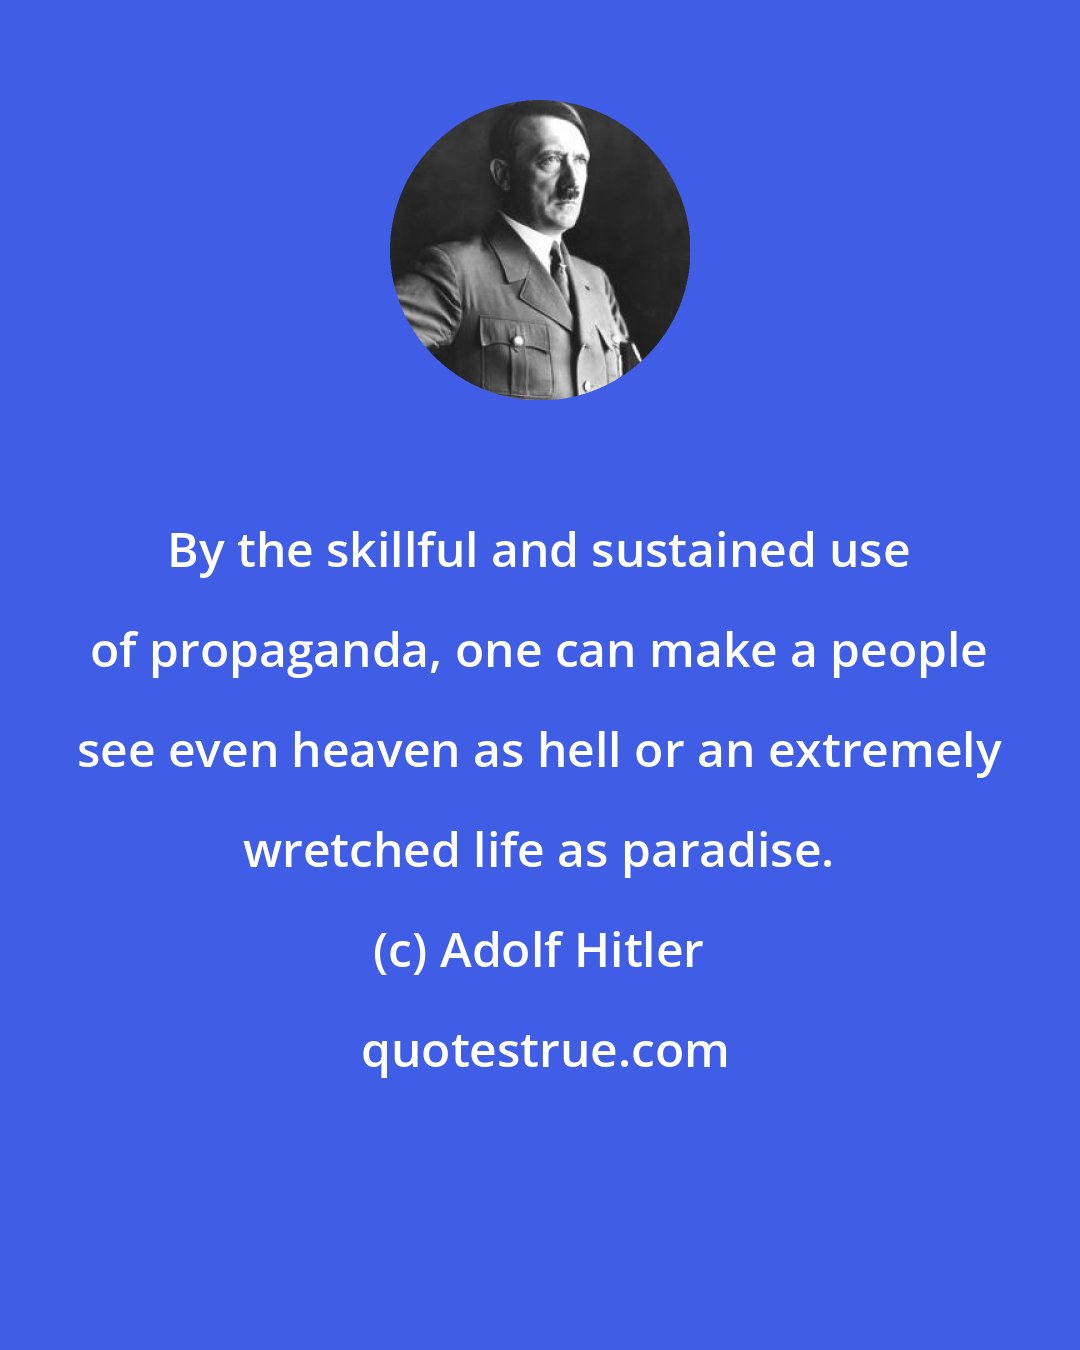 Adolf Hitler: By the skillful and sustained use of propaganda, one can make a people see even heaven as hell or an extremely wretched life as paradise.